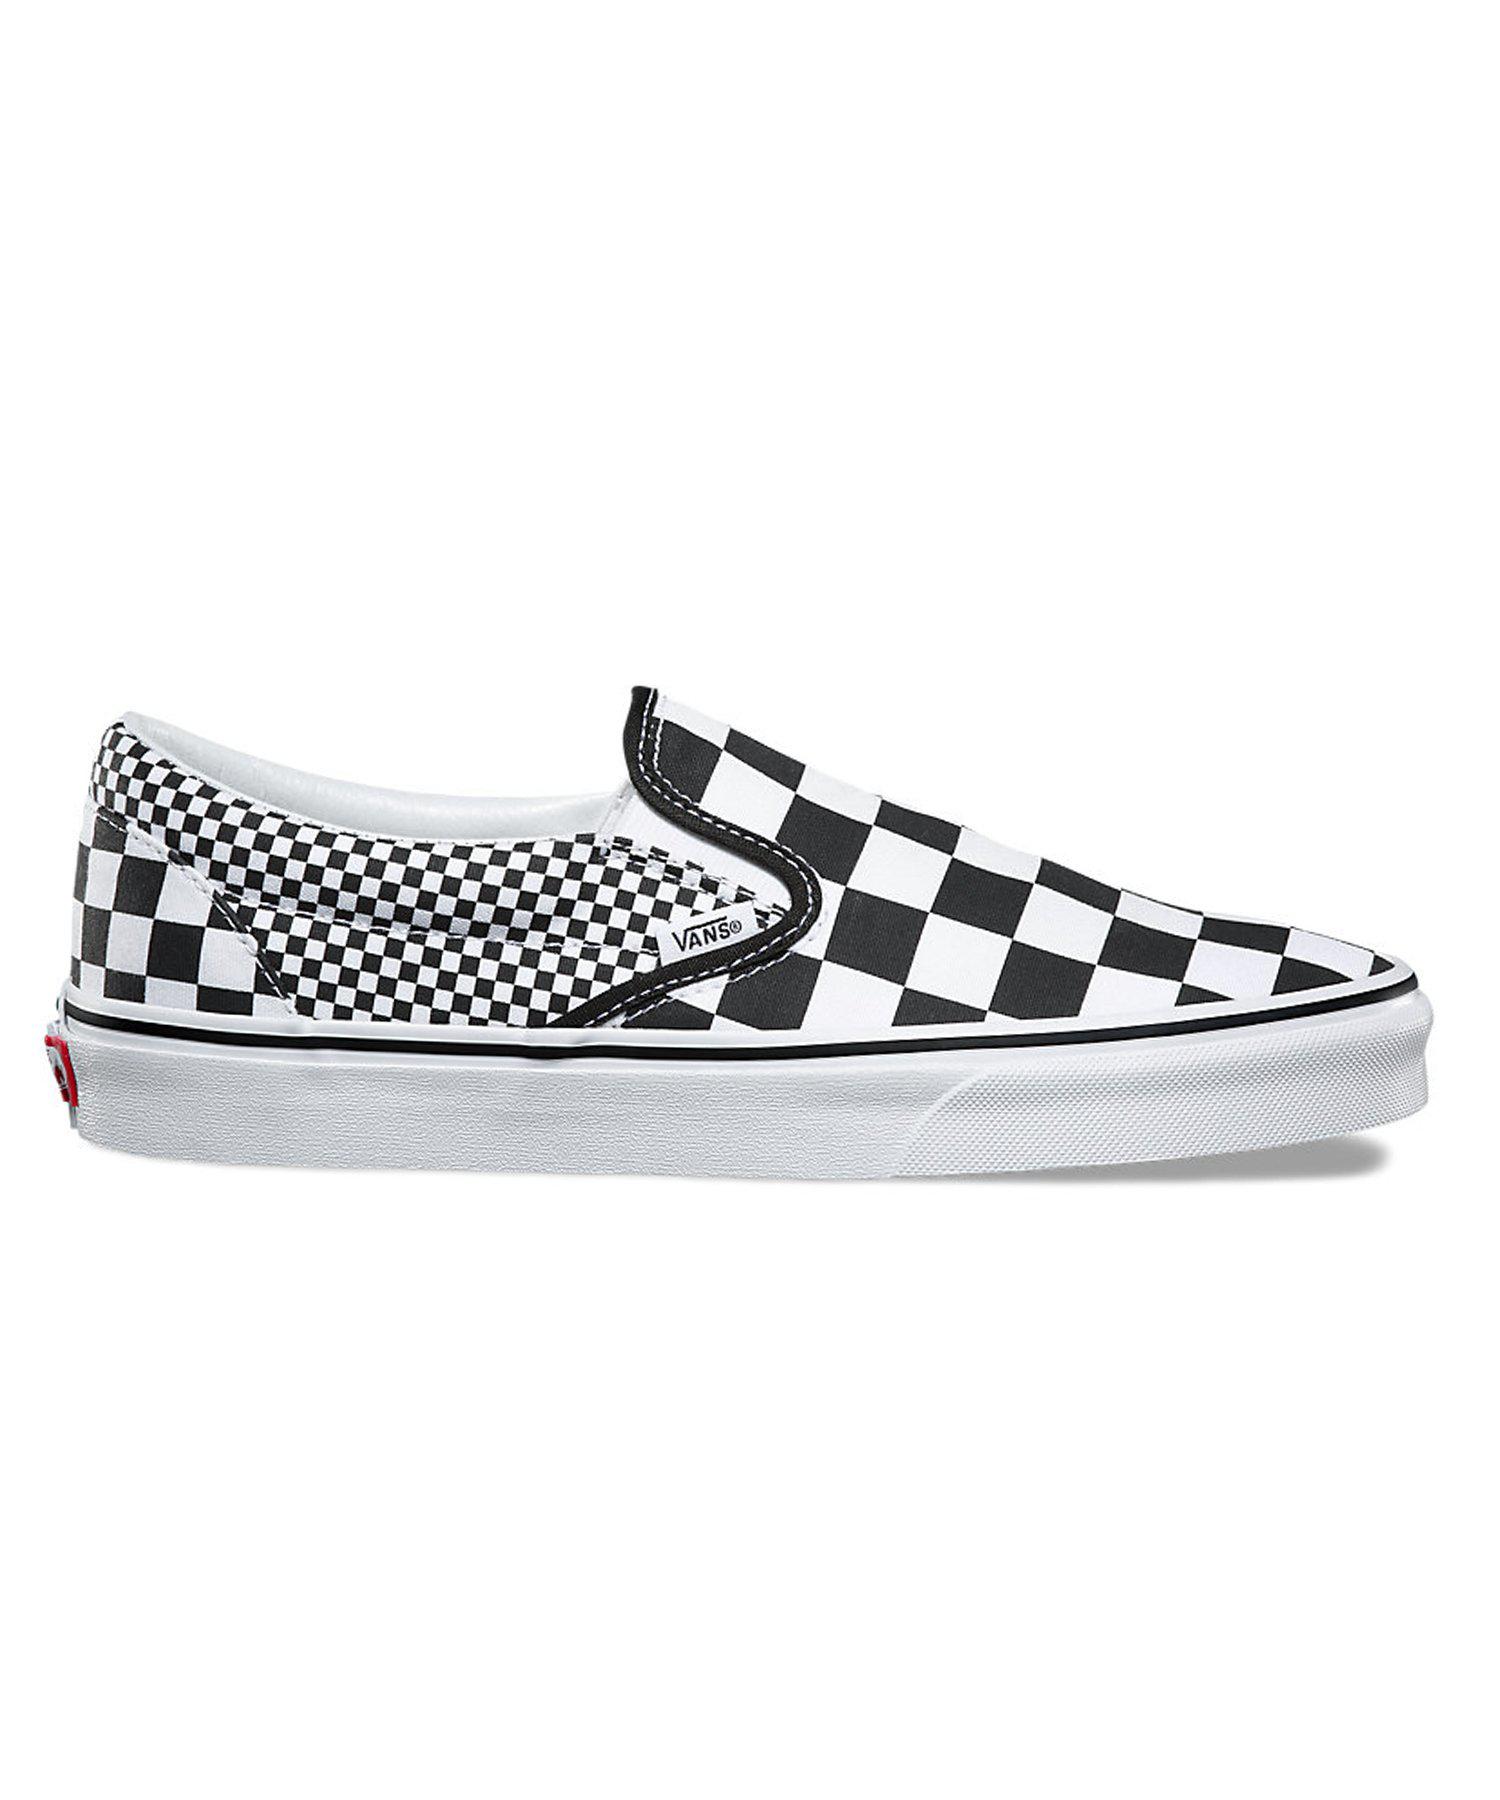 Vans Canvas Classic Slip-on In Mixed Checkerboard in White for Men - Lyst